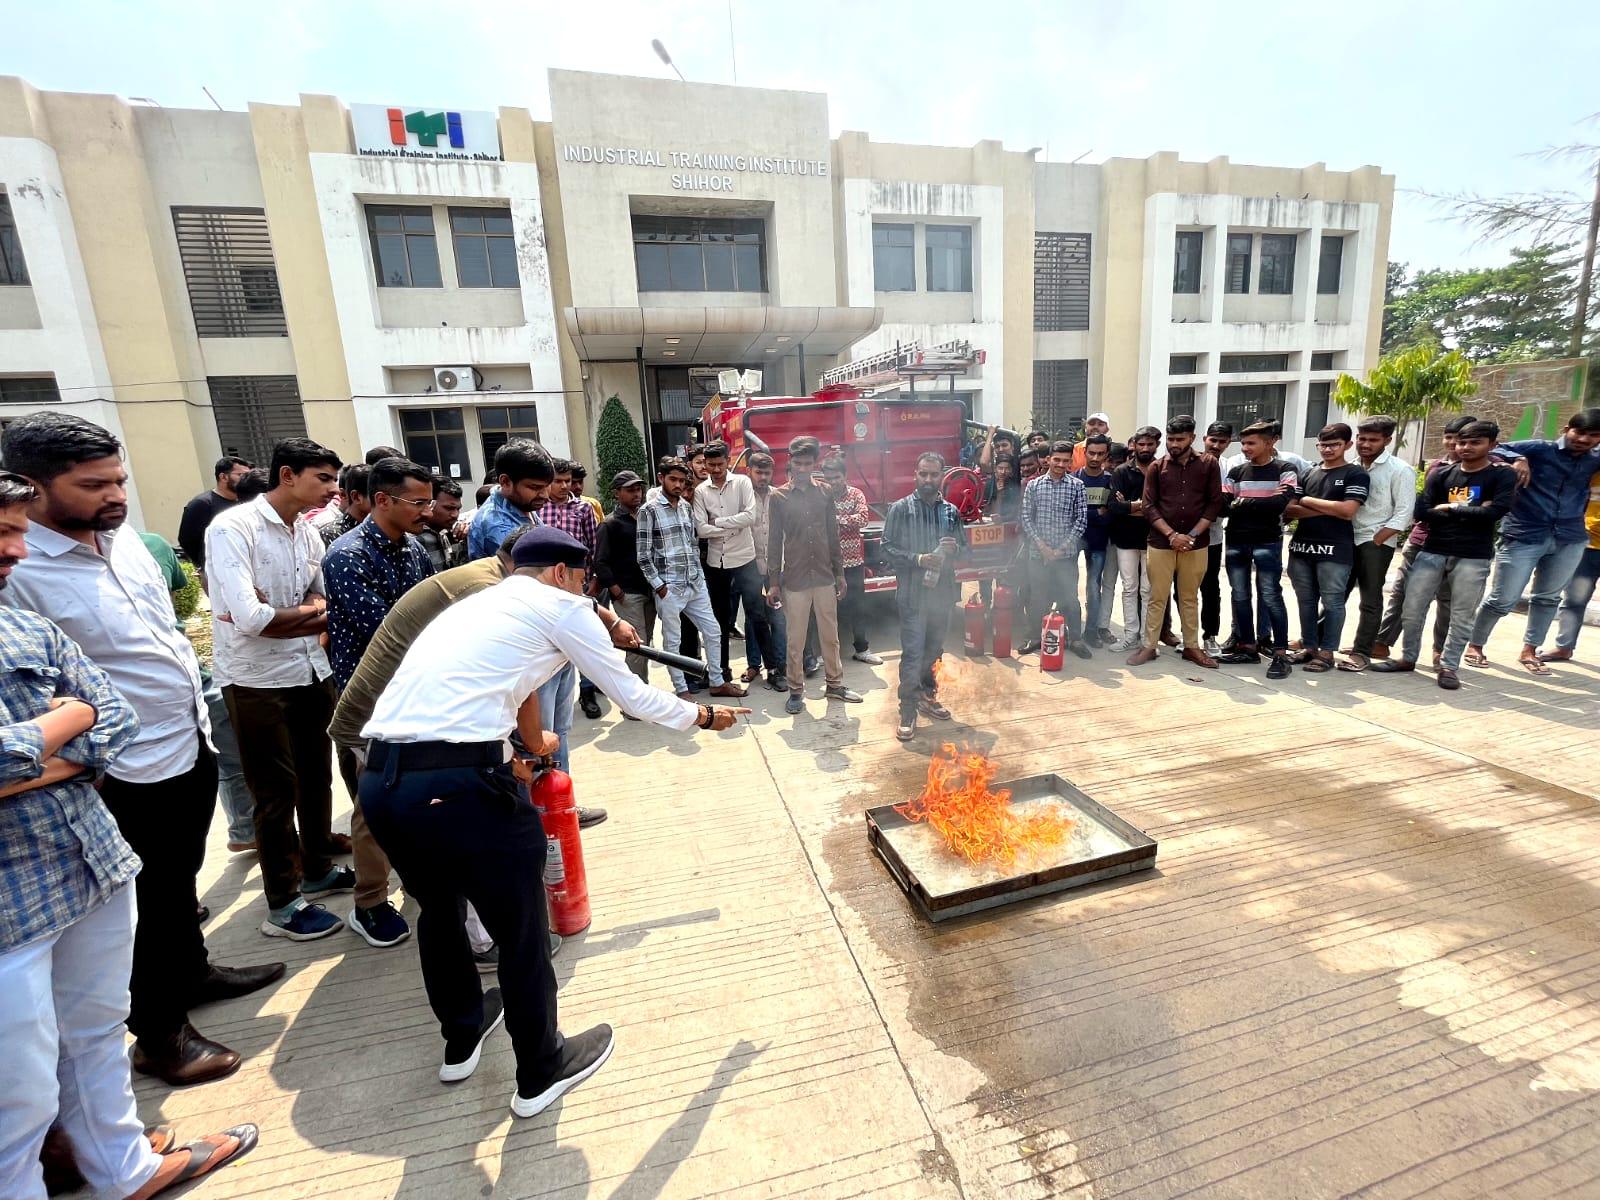 Fire safety guidance was given at ITI by Sihore Fire Brigade